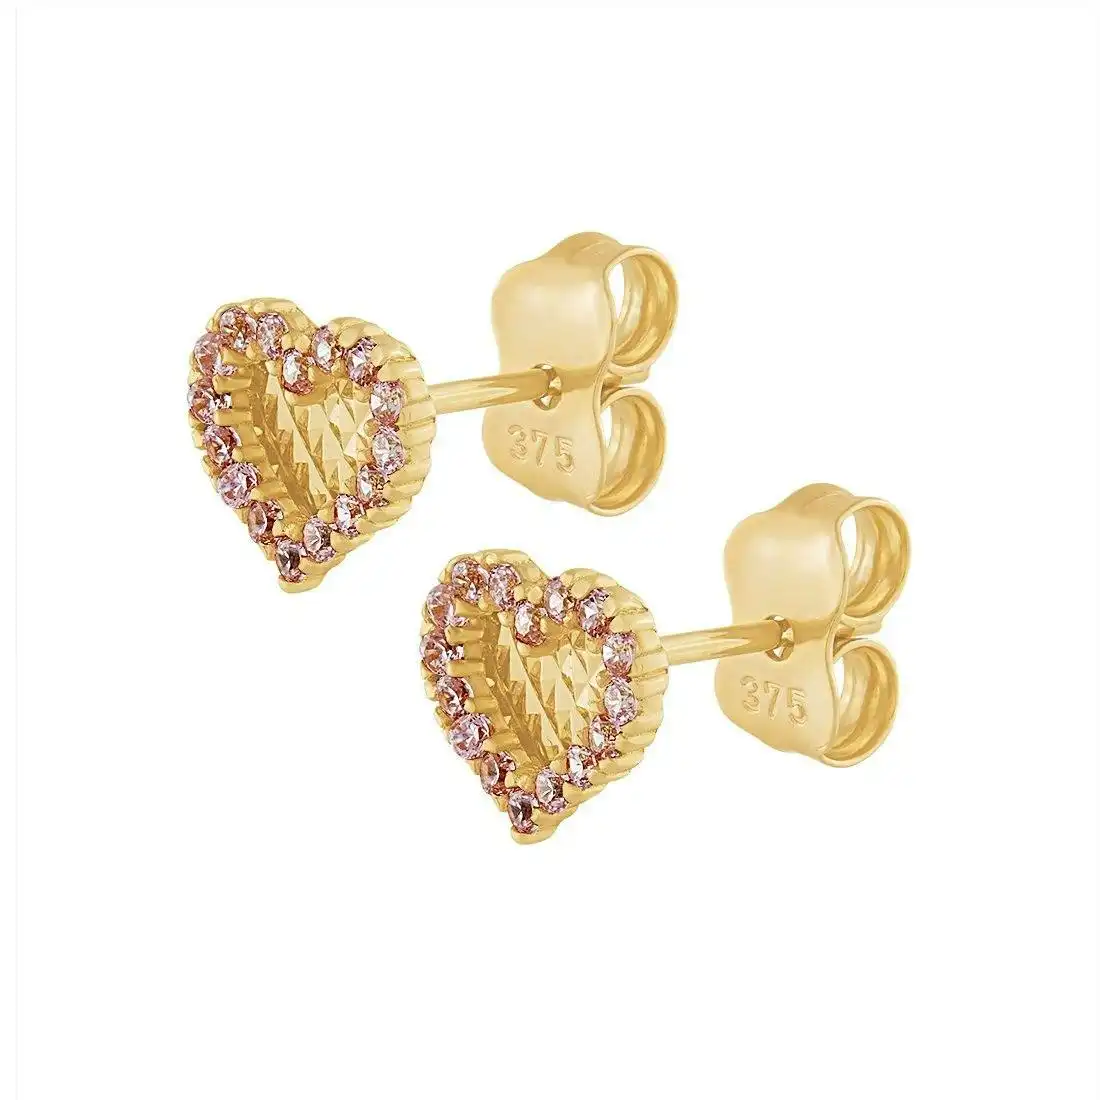 9ct Yellow Gold Heart Stud Earrings with Cubic Zirconia